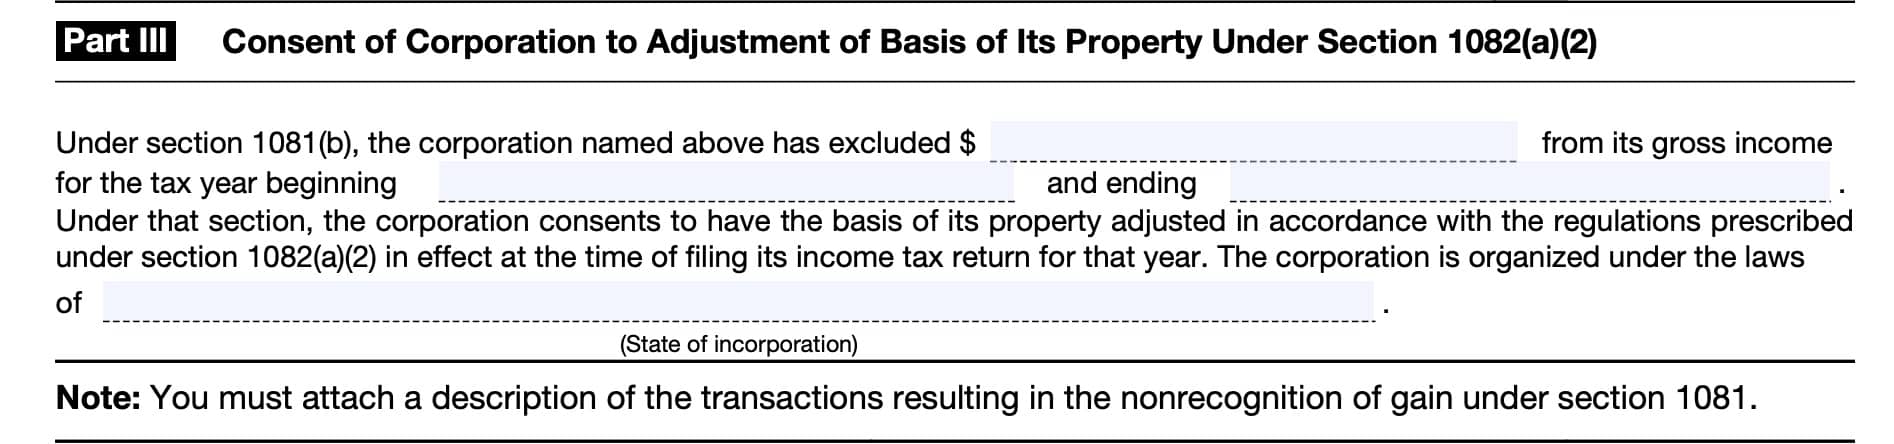 form 982 part iii, consent of corporation to adjustment of basis of its property under Section 1082(a)(2)